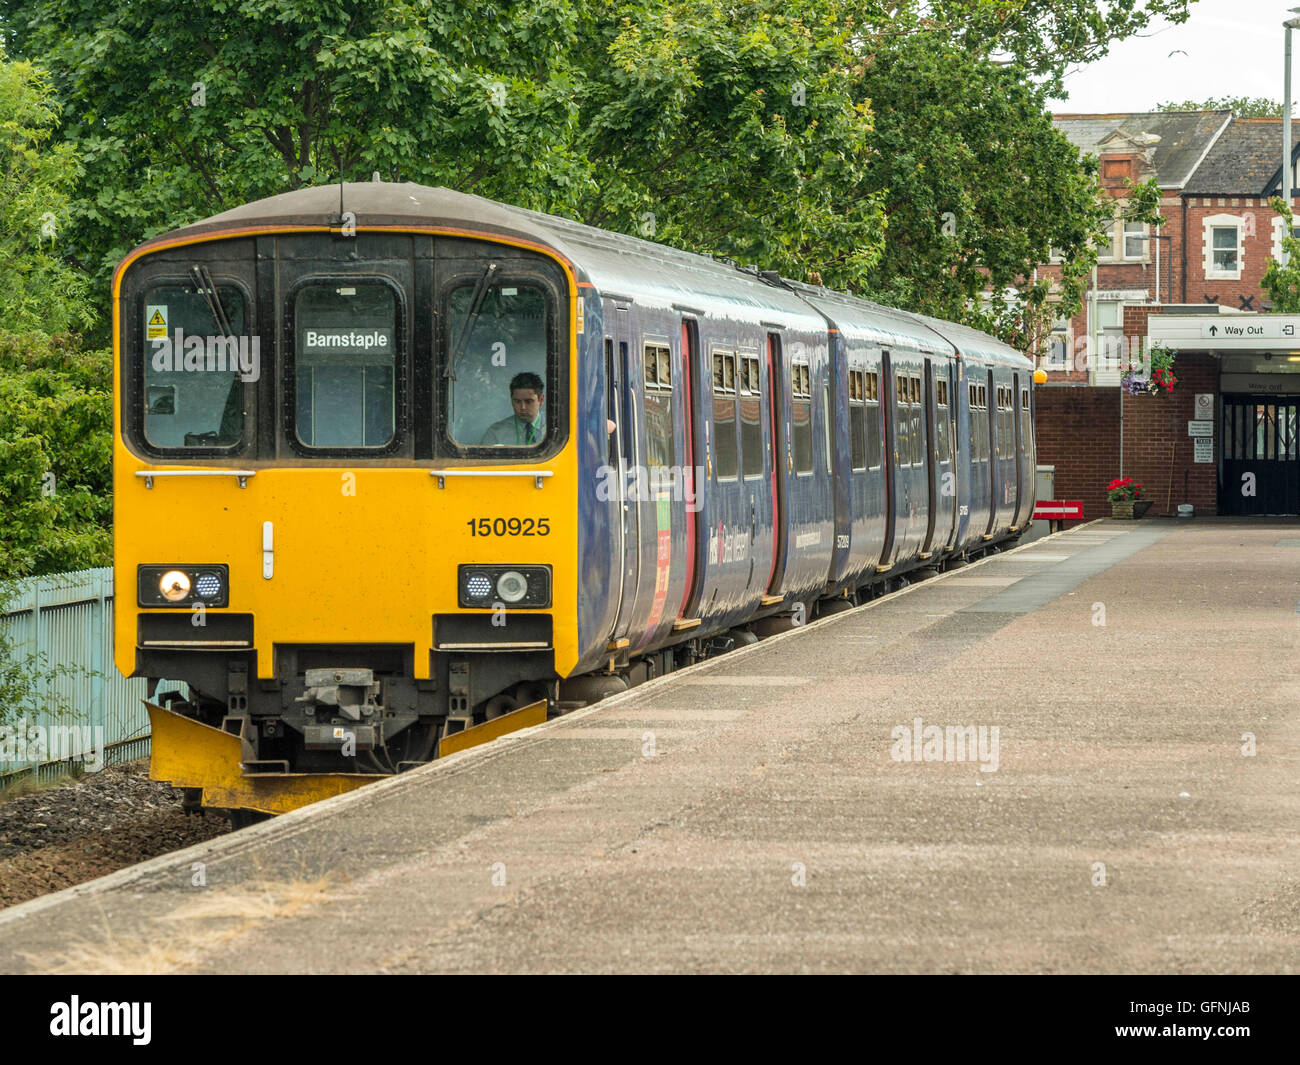 Great Western Train formed of three carriages waits at Exmouth Station bound for Barnstaple along the picturesque Avocet line. Stock Photo